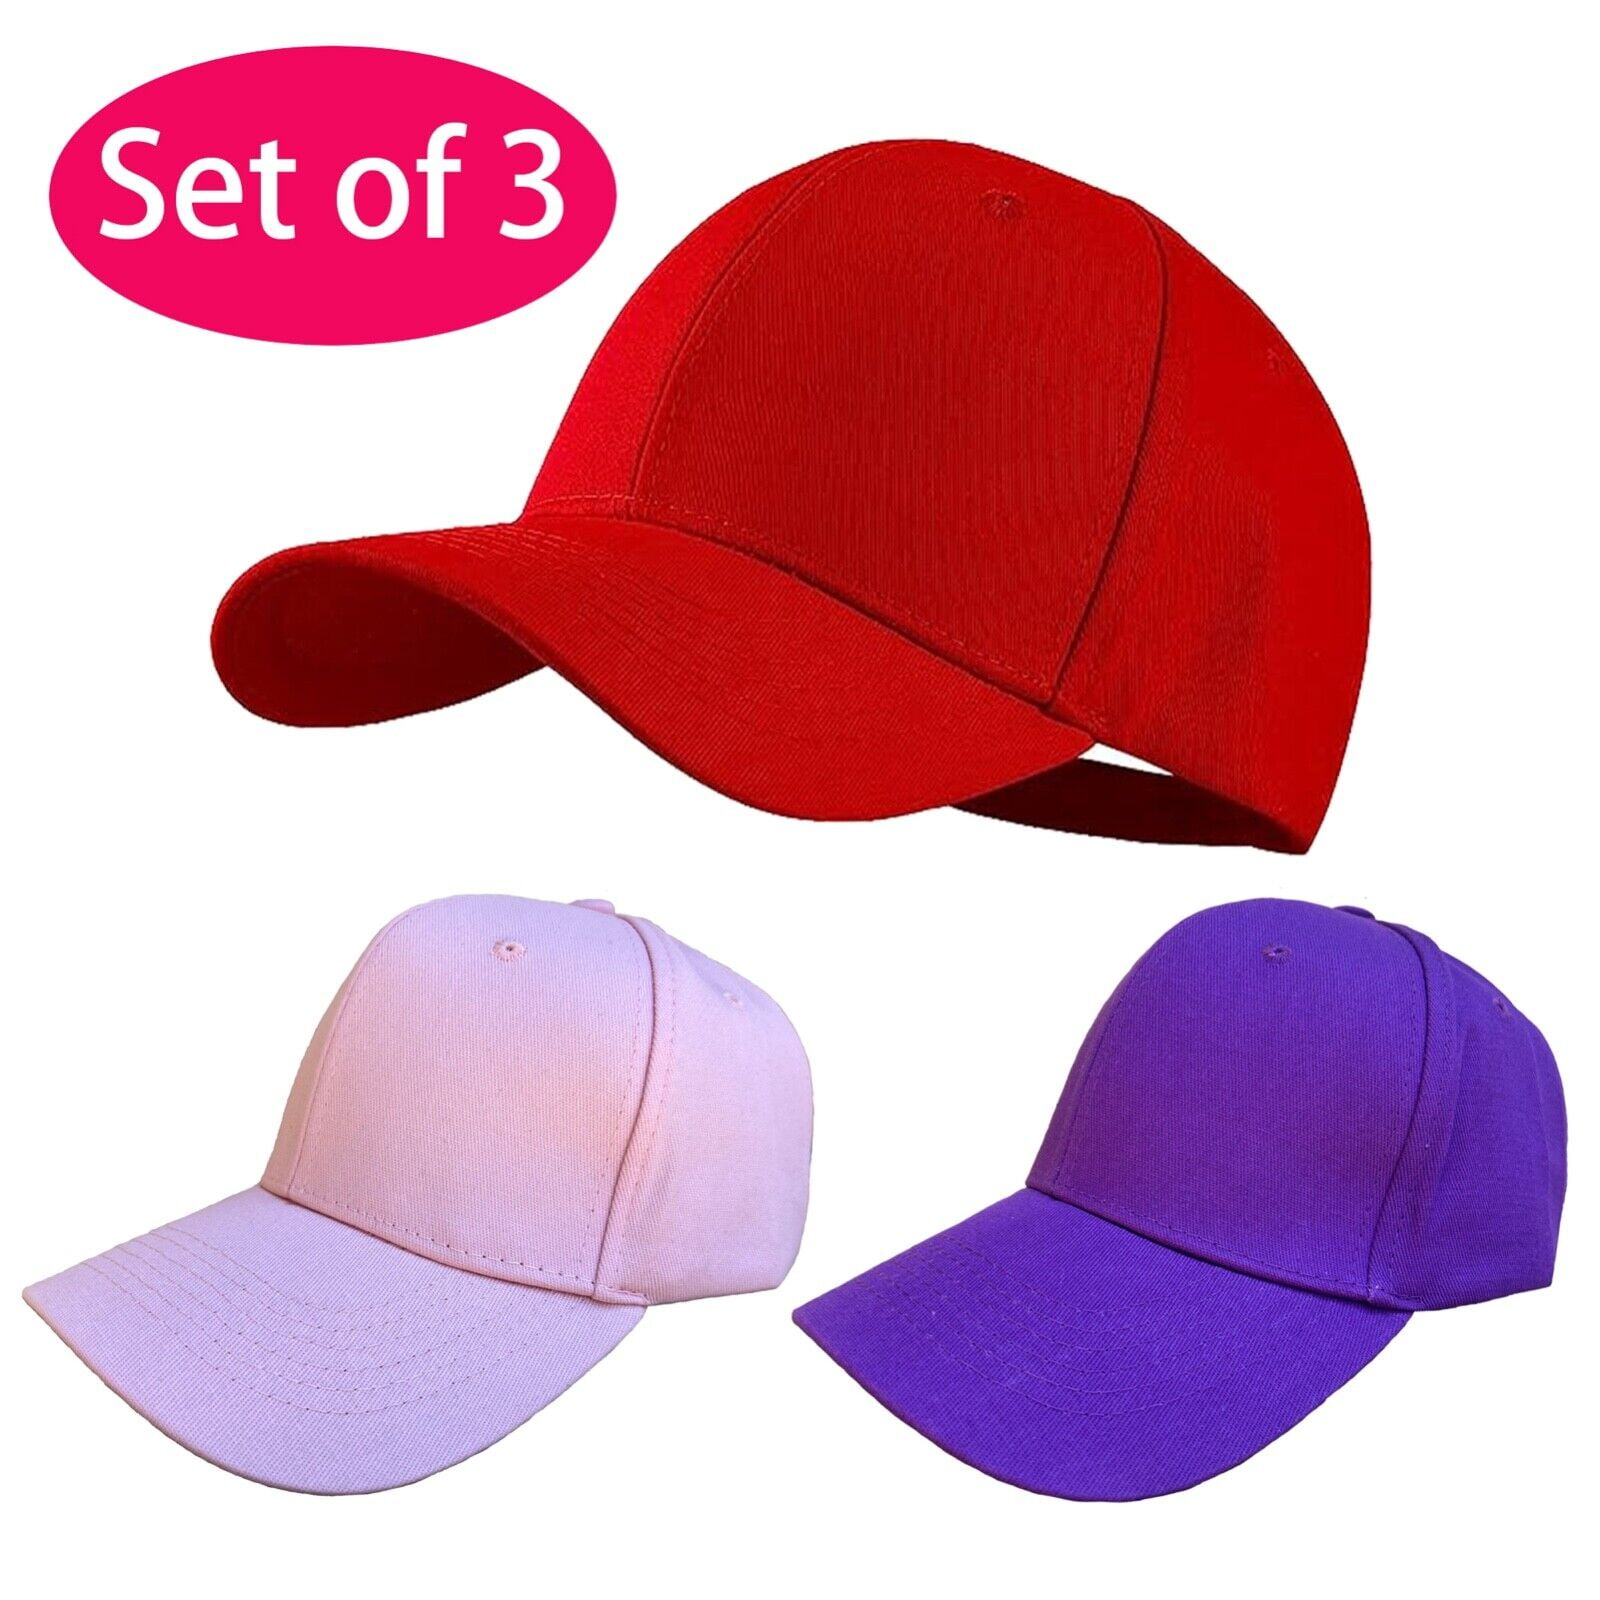 Baseball Structured Flex Fit Set Solid Cotton Size One Polo-Style 3, Women of Adjustable Hats, Cap, 100% Plain Hat